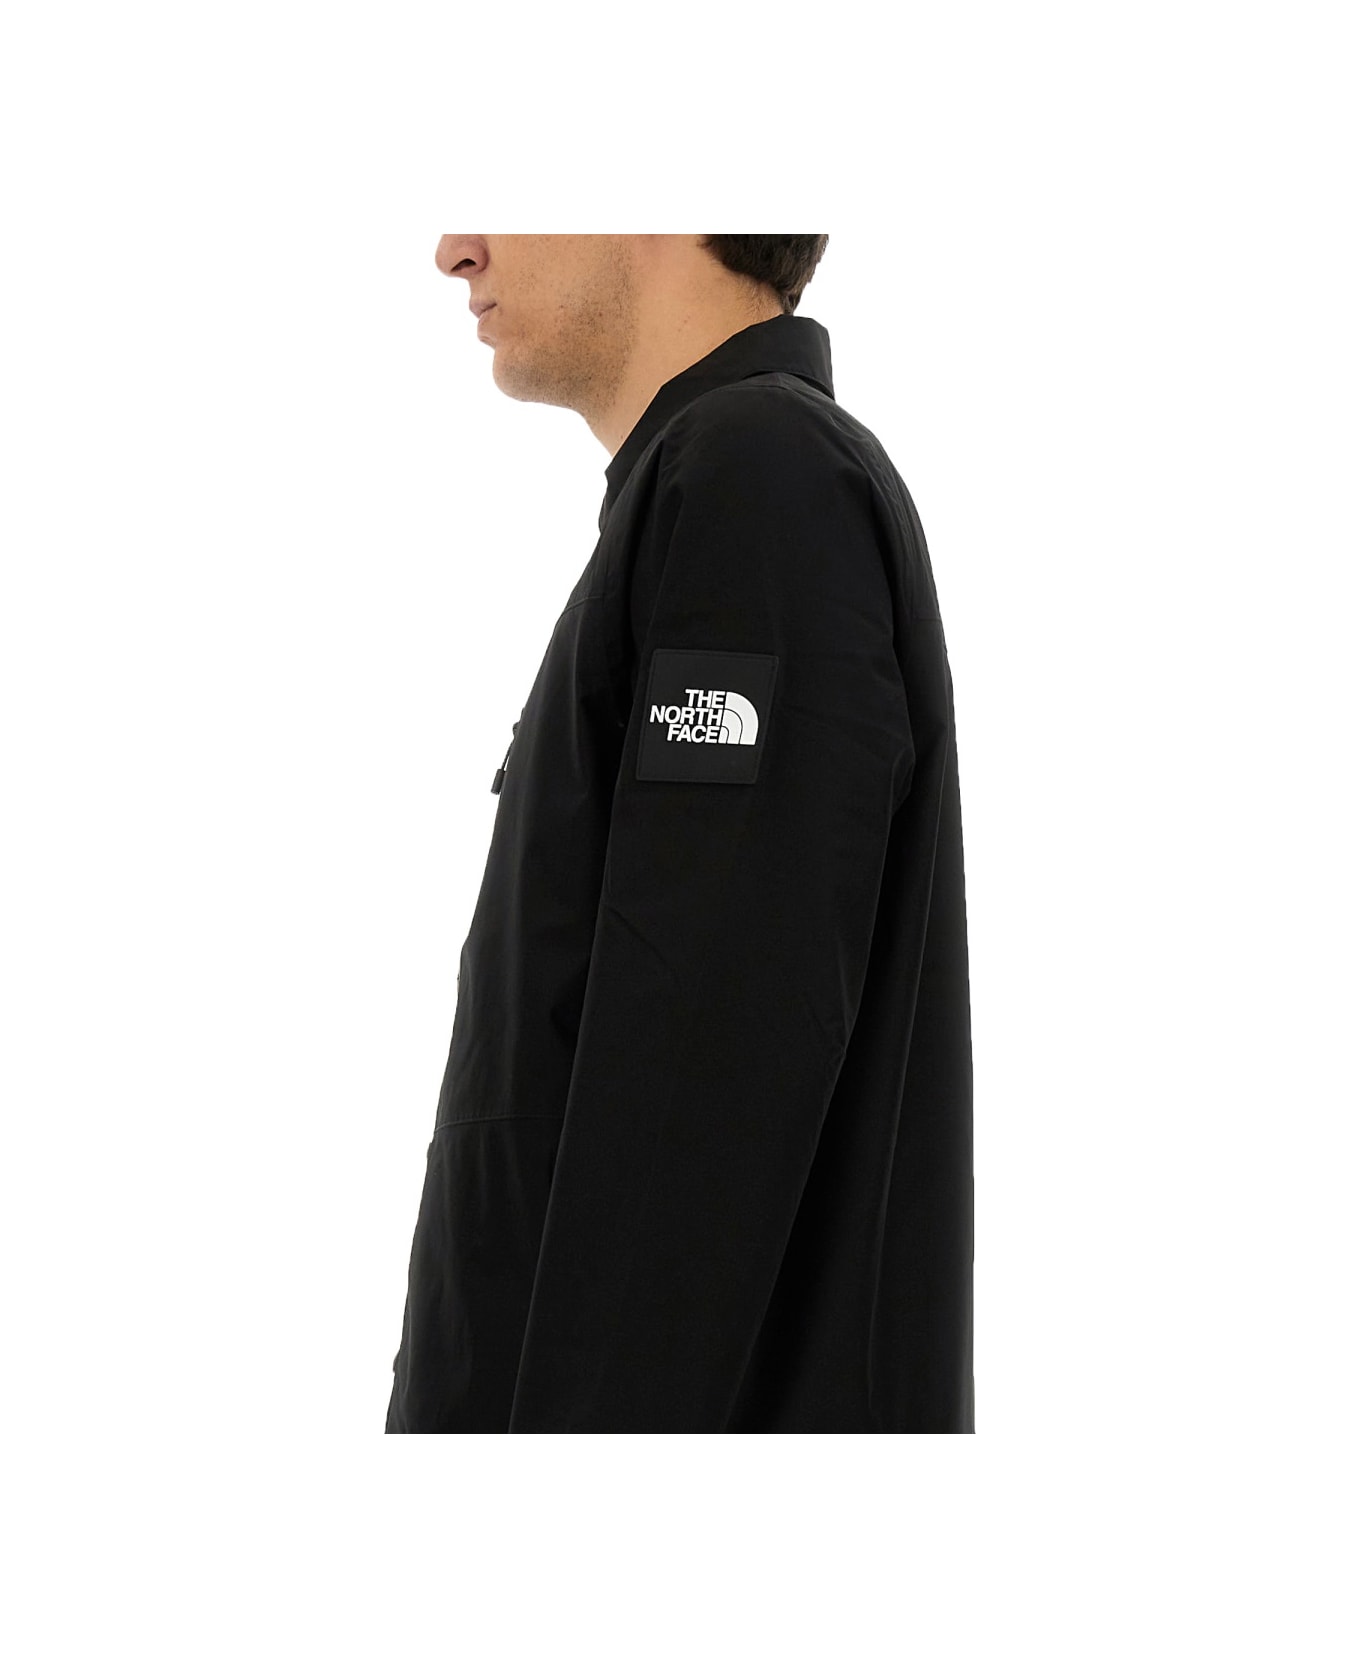 The North Face Jacket With Logo - BLACK ジャケット